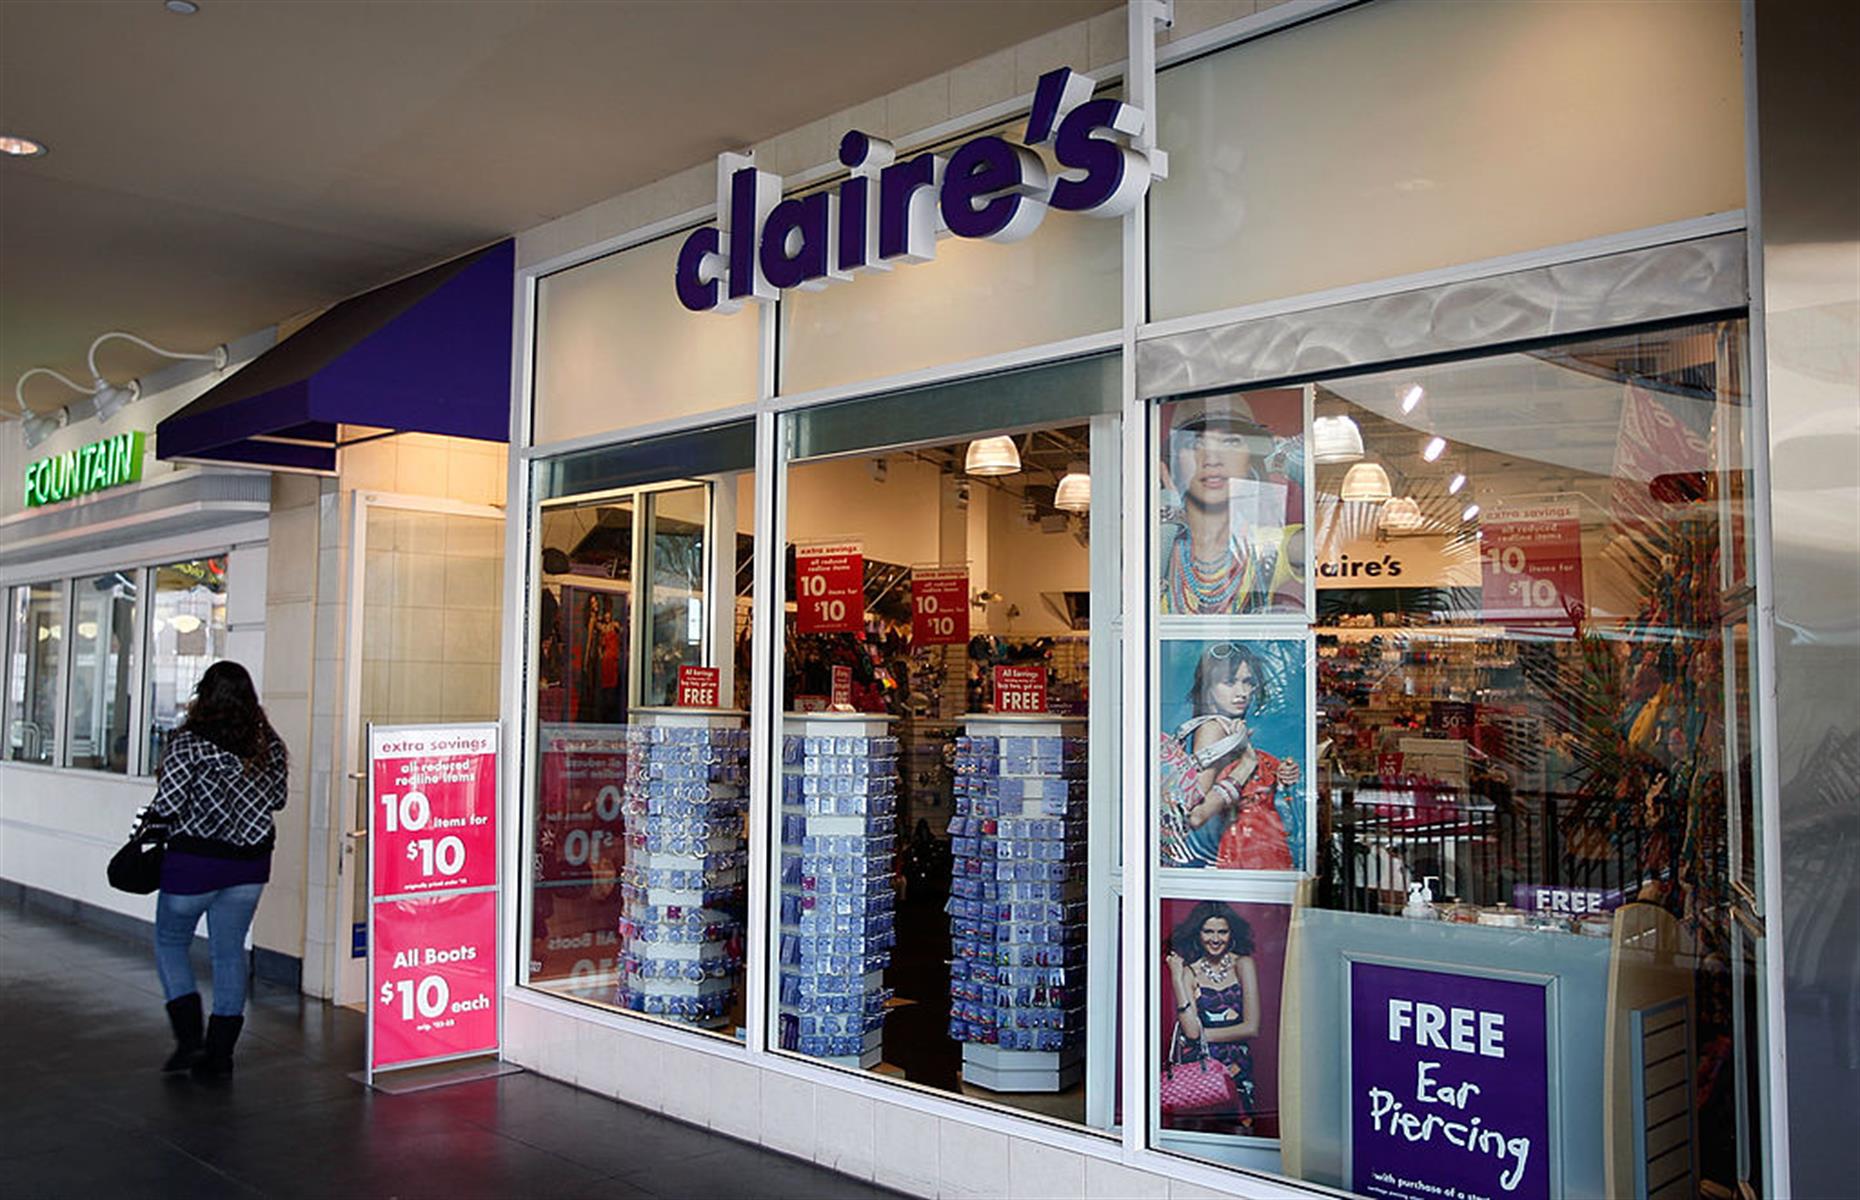 2019: Claire's make-up products